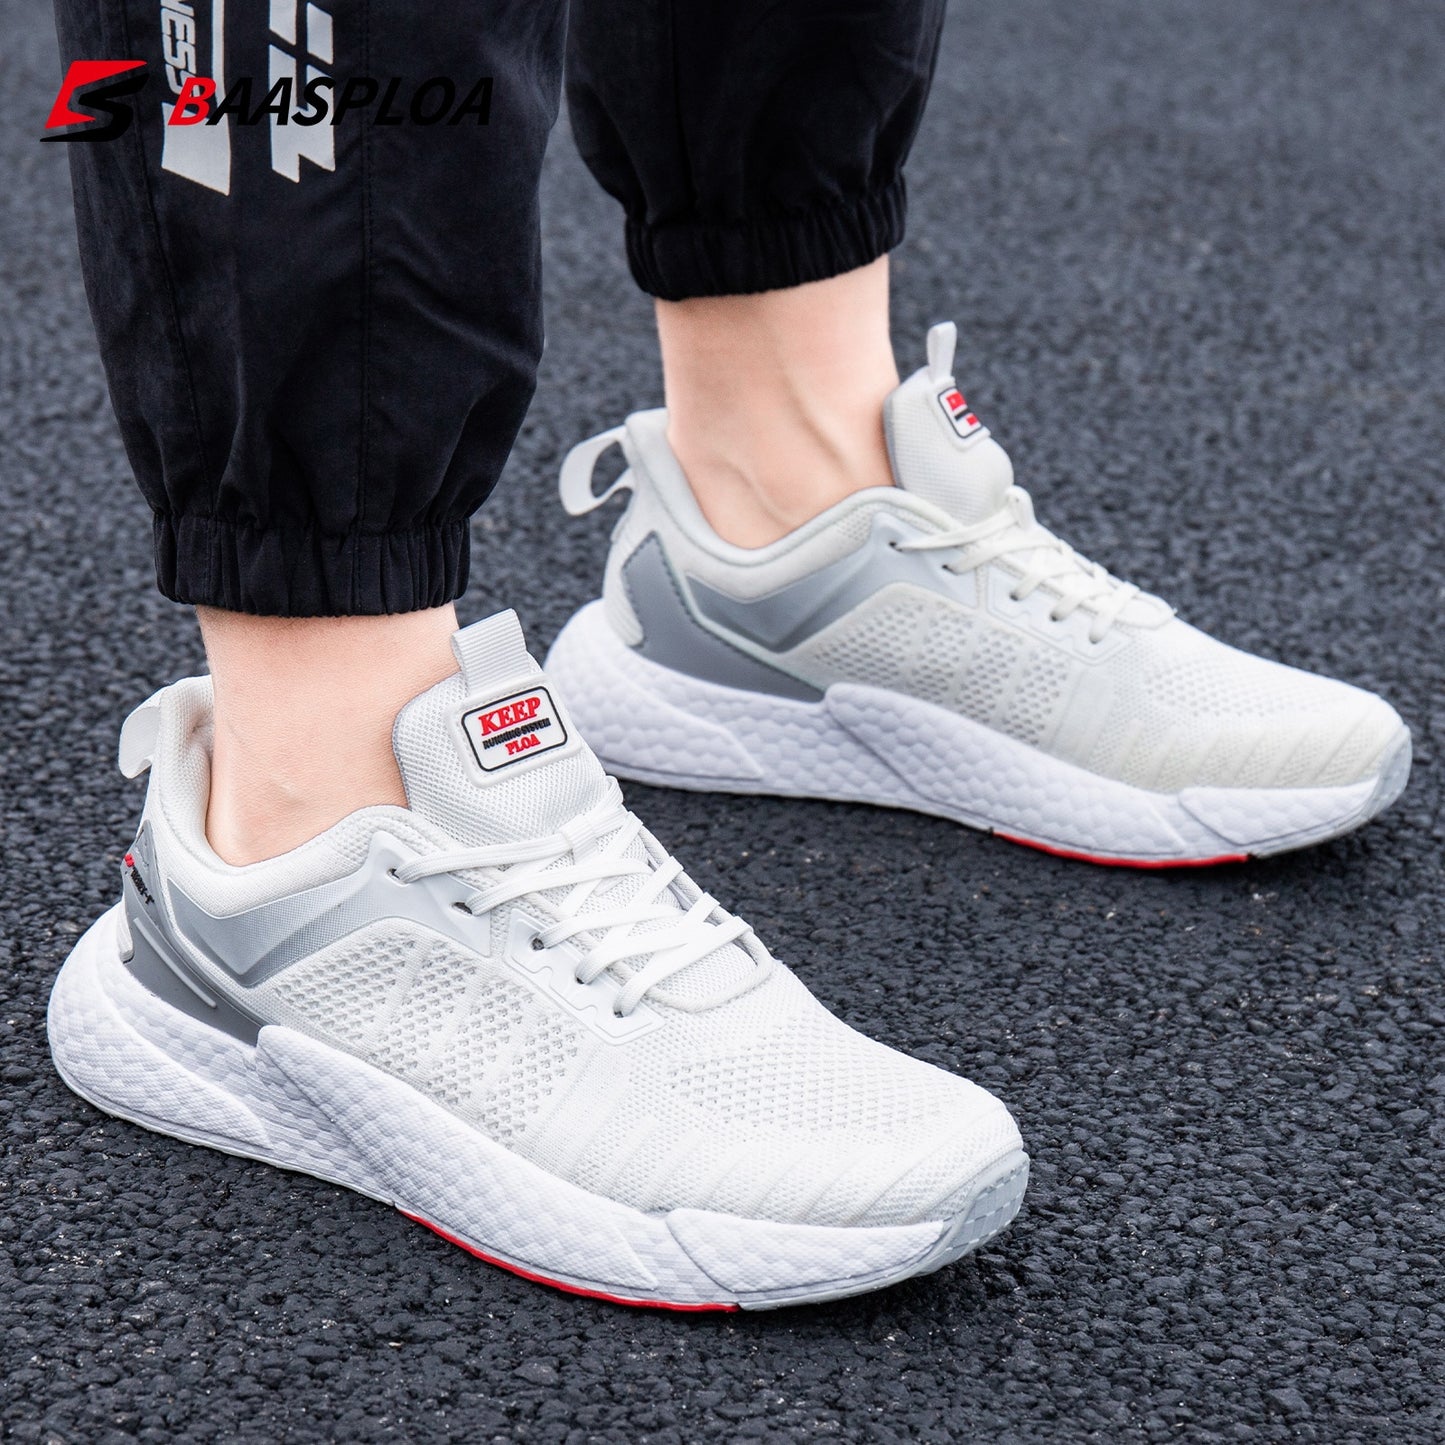 Men's Comfortable Knit Walking Shoes Breathable Fashion Sneaker Anti-Slip Shock-Absorbing Casual Sneakers Shoes The Clothing Company Sydney